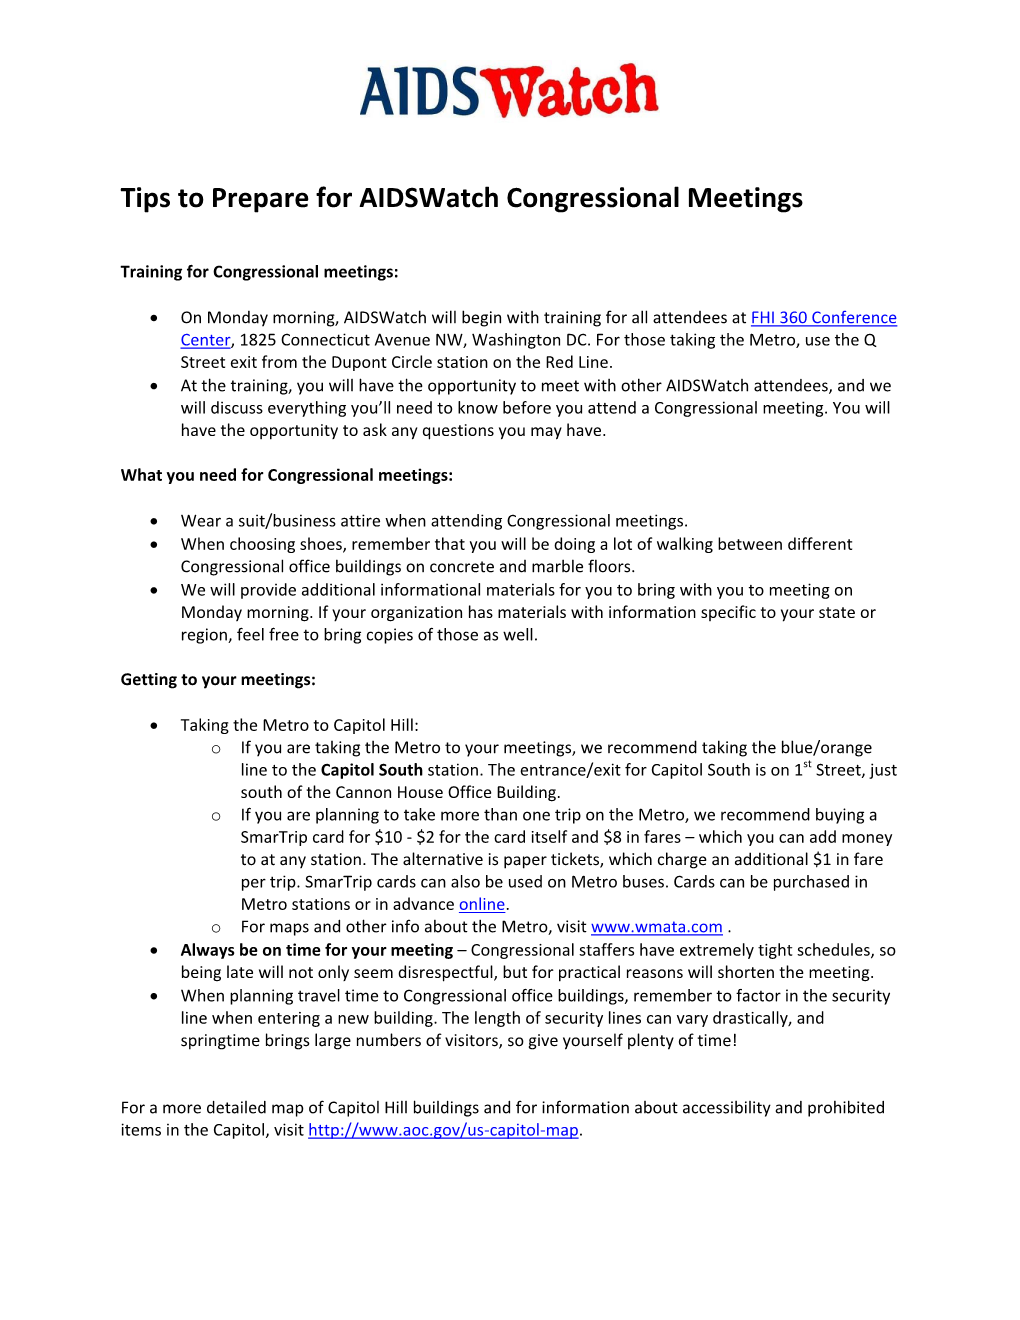 Tips to Prepare for Aidswatch Congressional Meetings